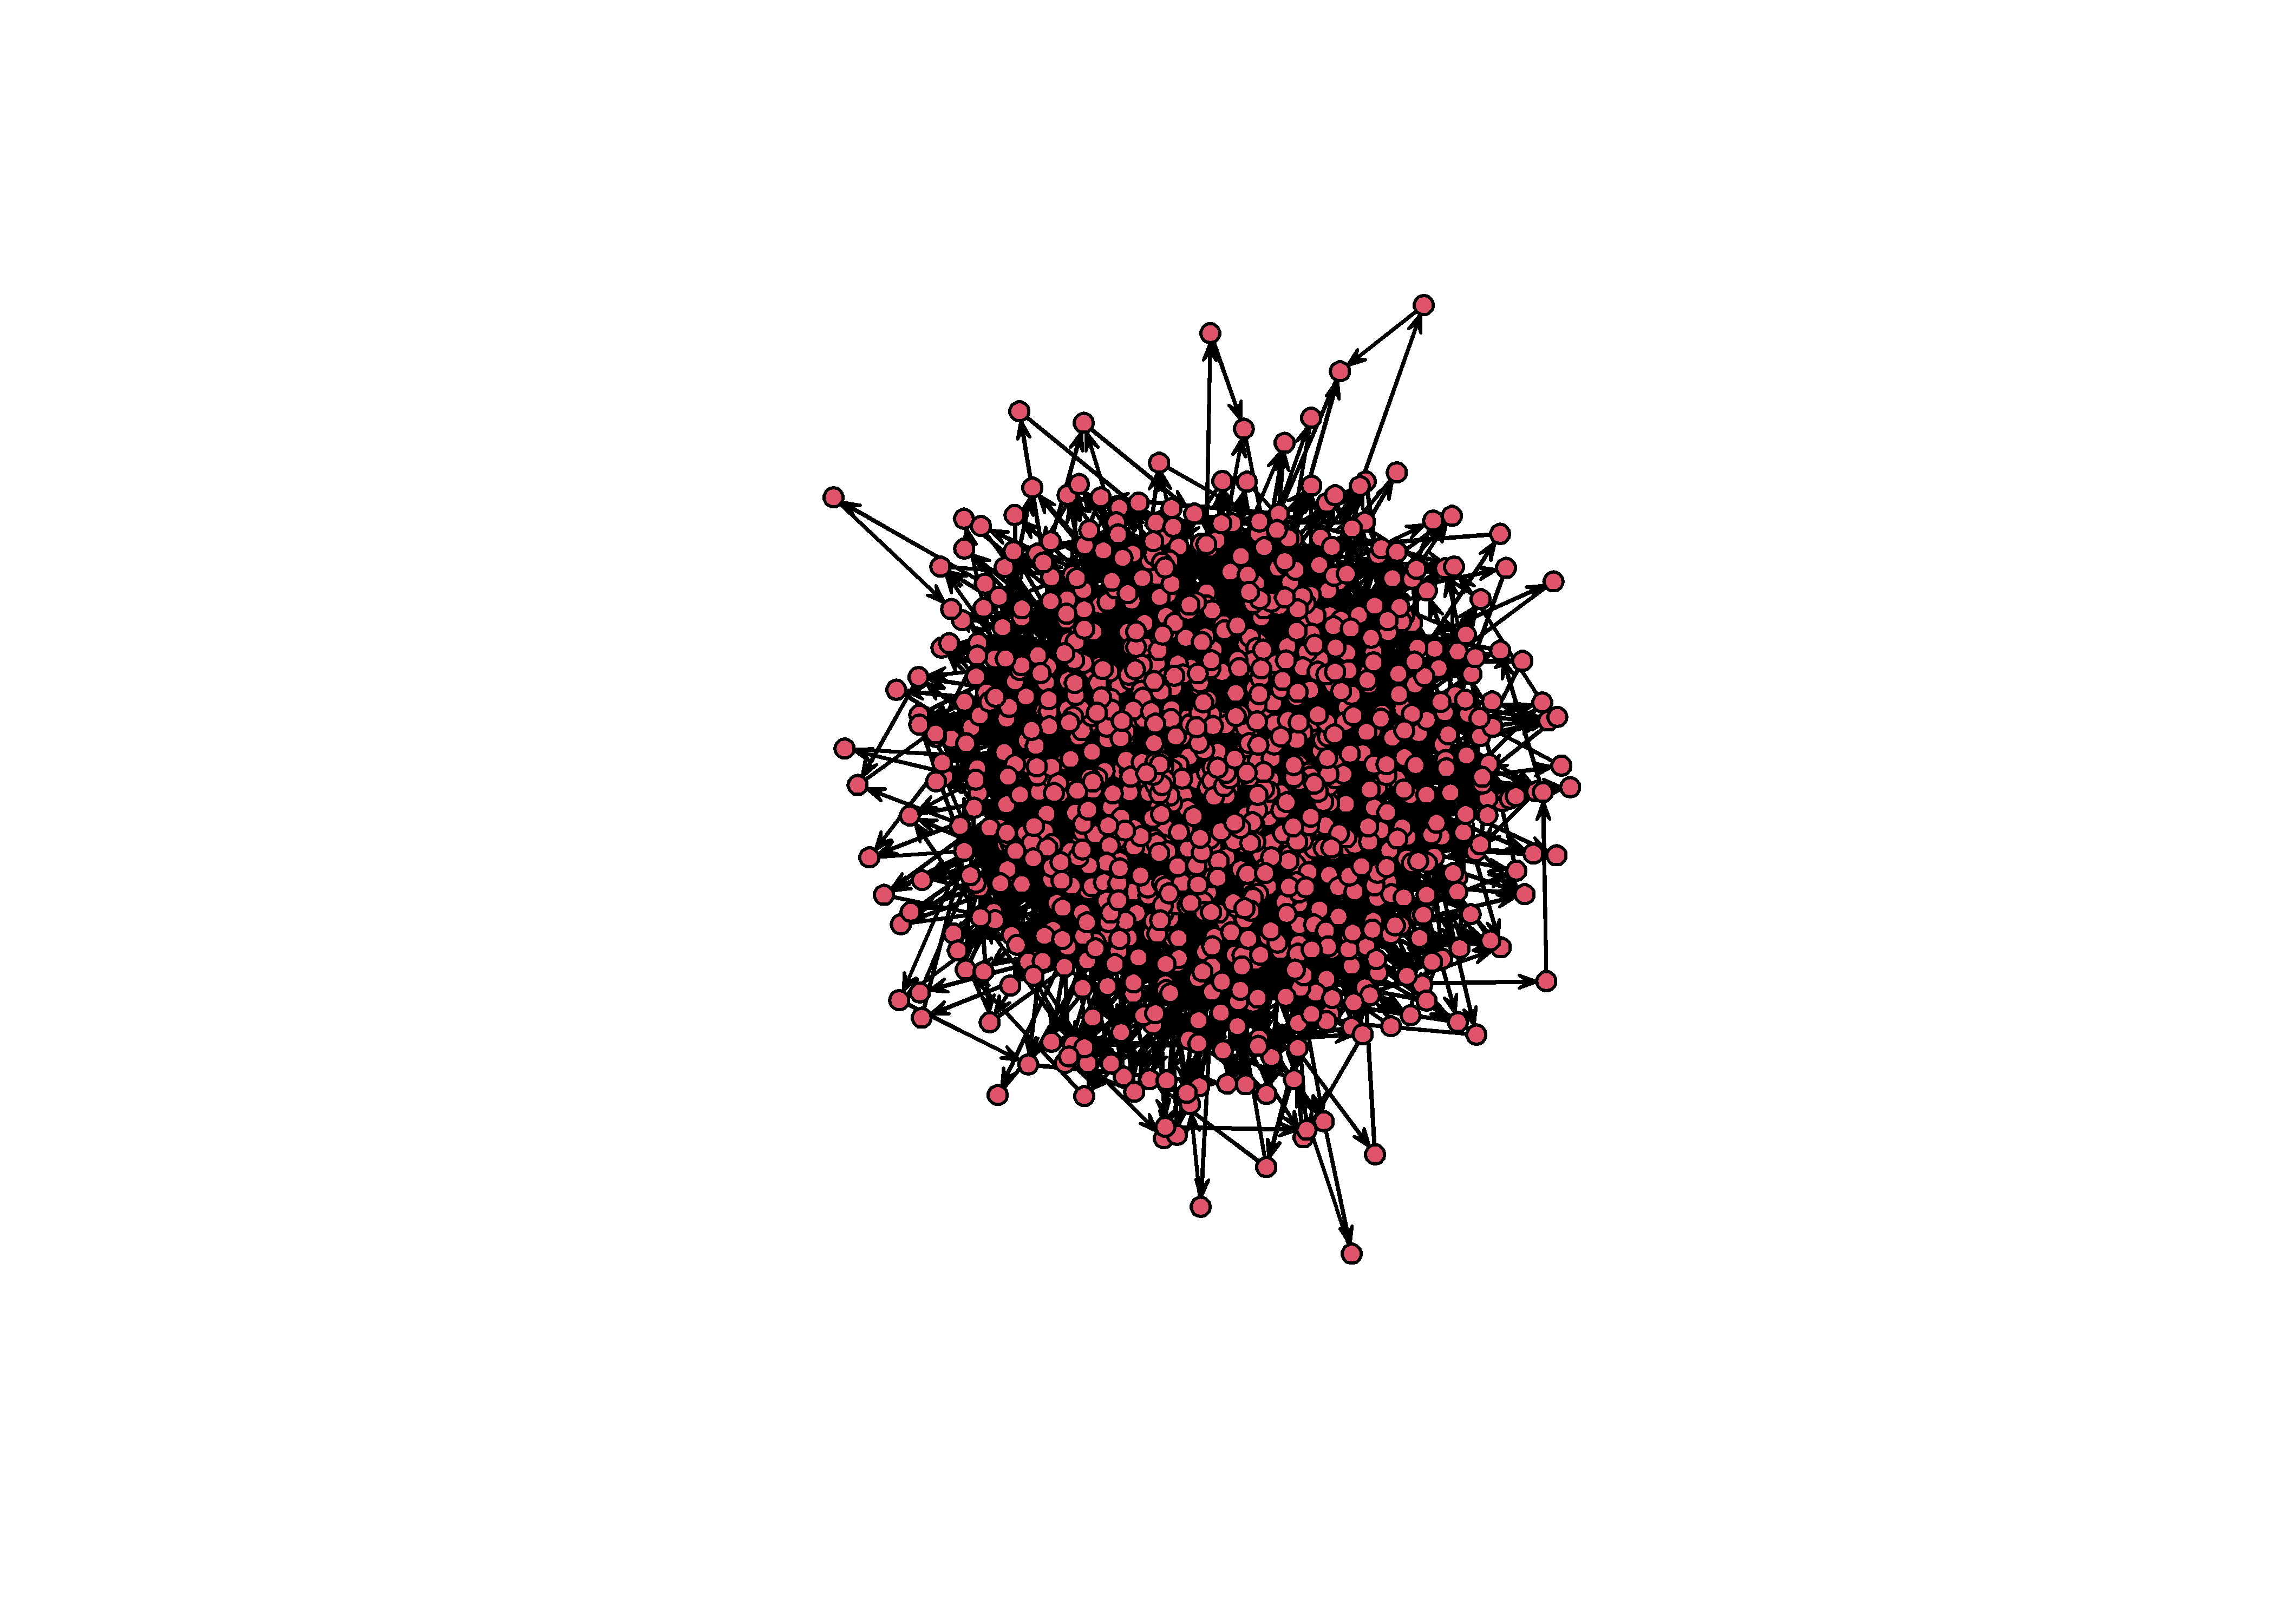 An unforunate hairball. Note that this is a network with a very low density (0.003)!